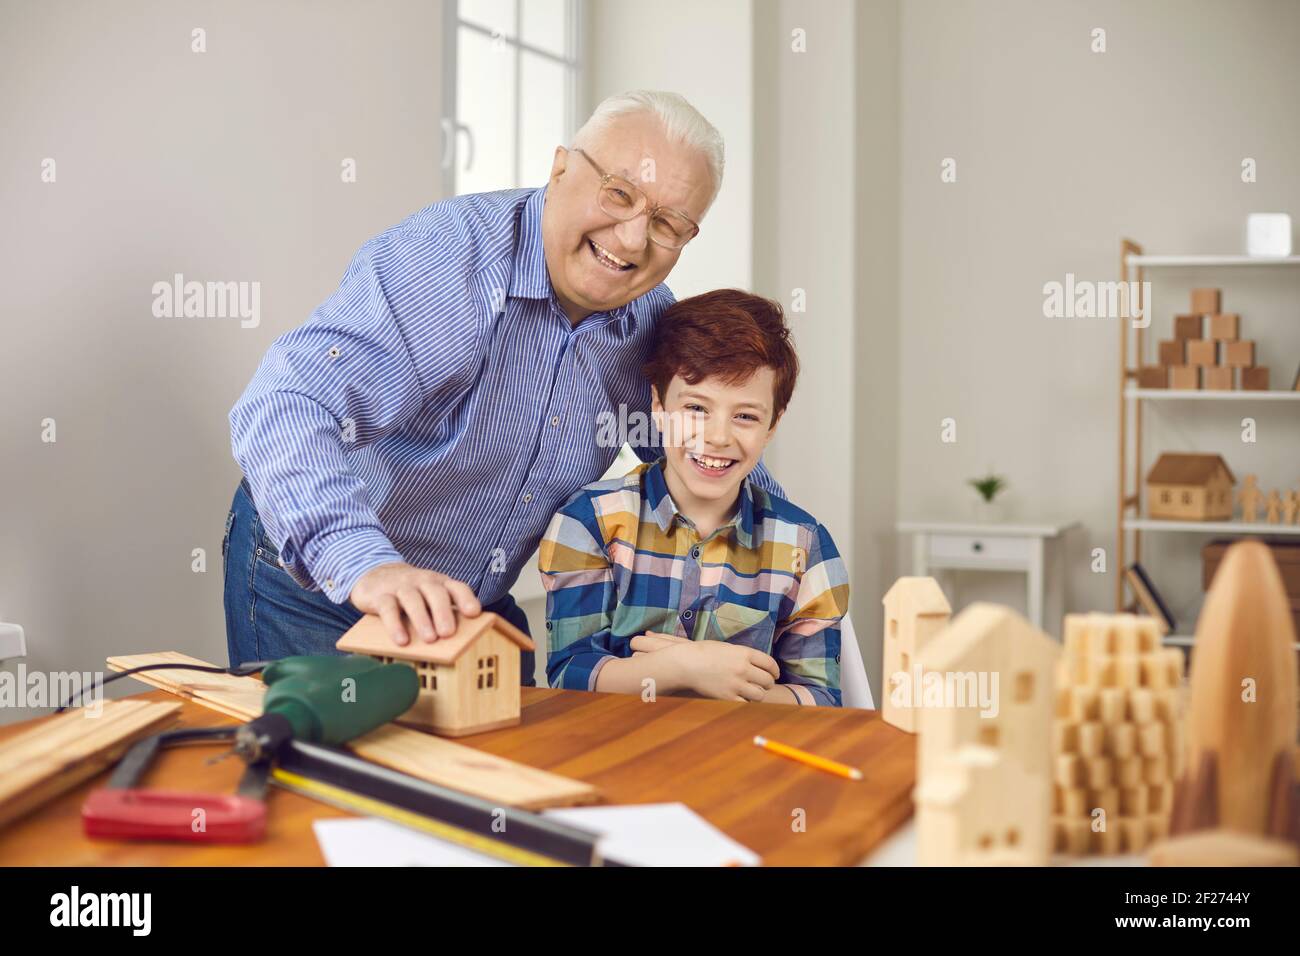 Happy grandpa and grandson making wooden toys and having fun in carpentry workshop Stock Photo